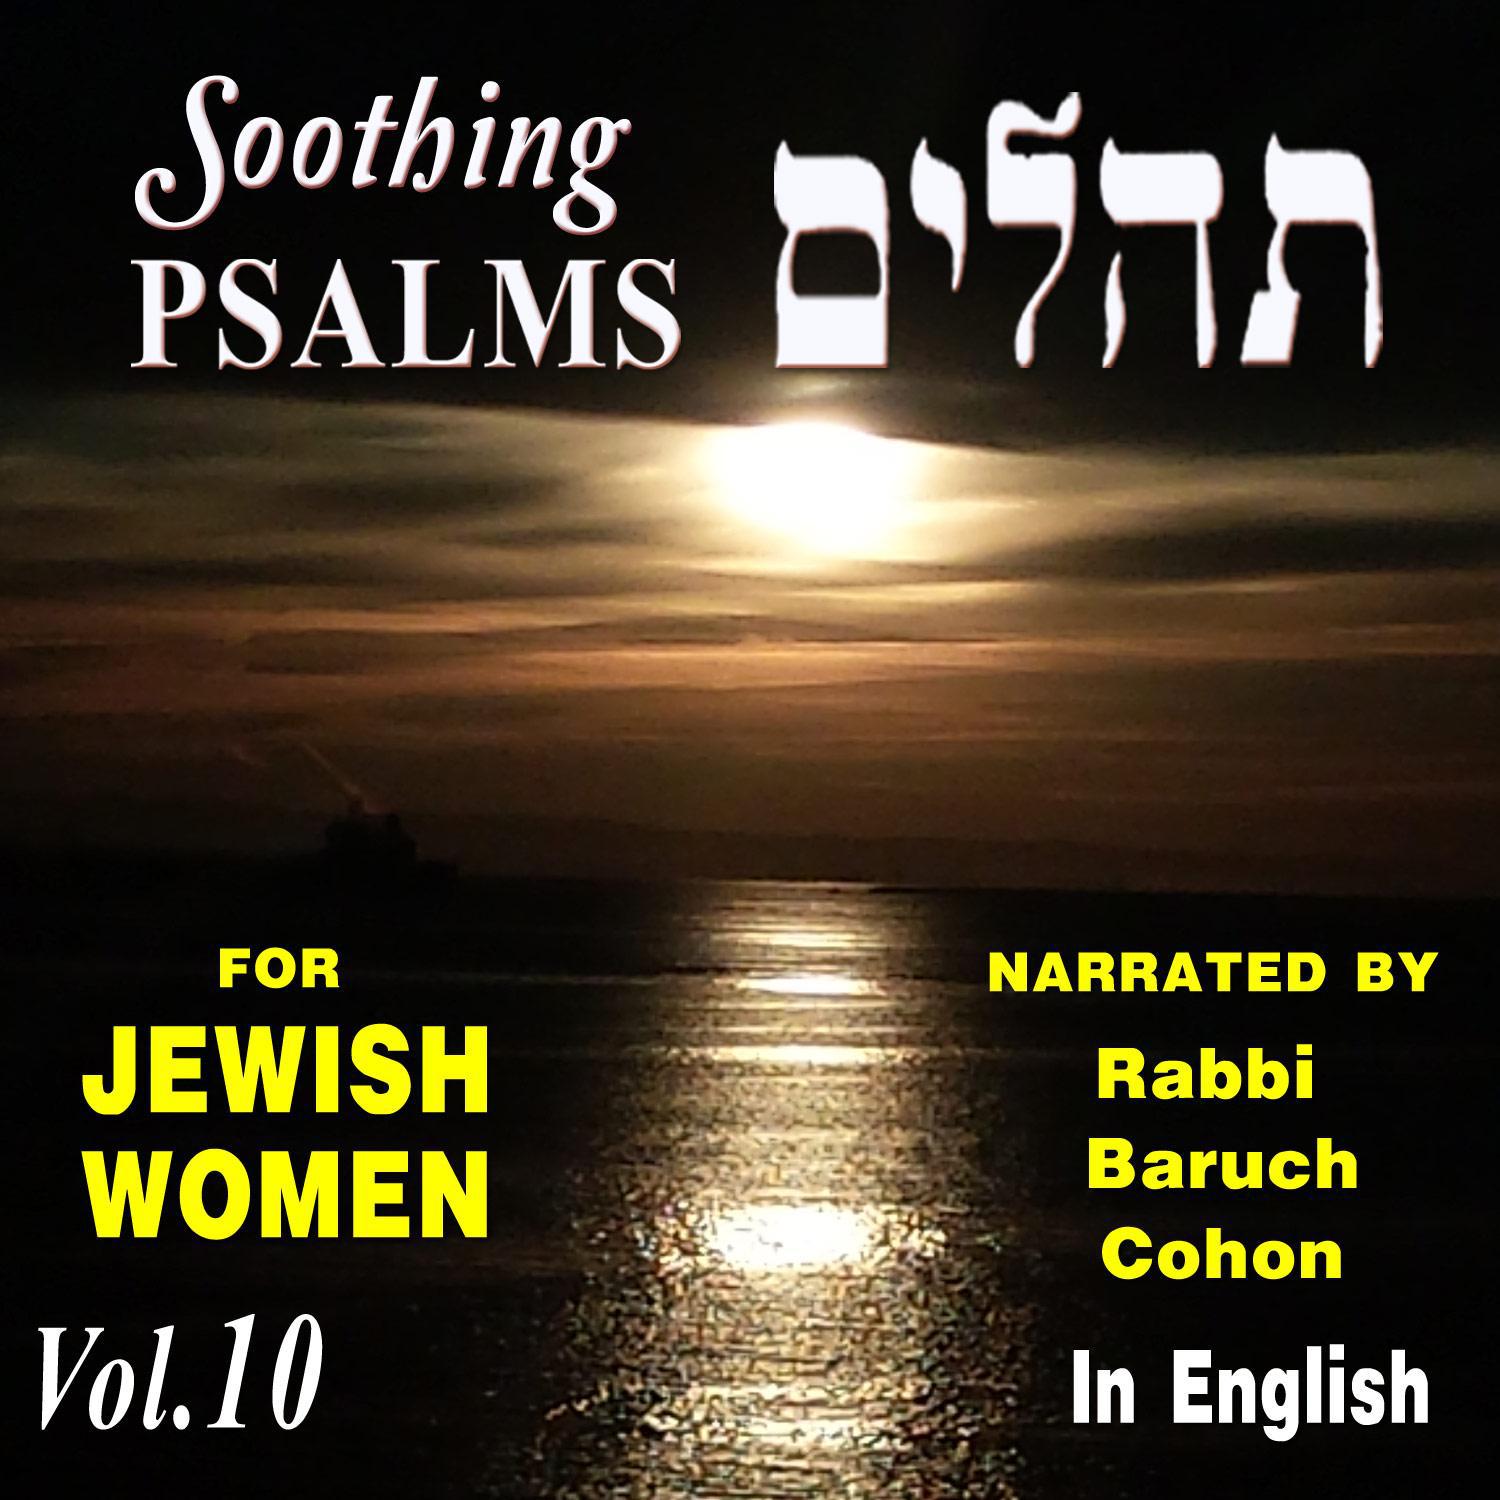 Soothing Psalms for Jewish Women, Vol. 10